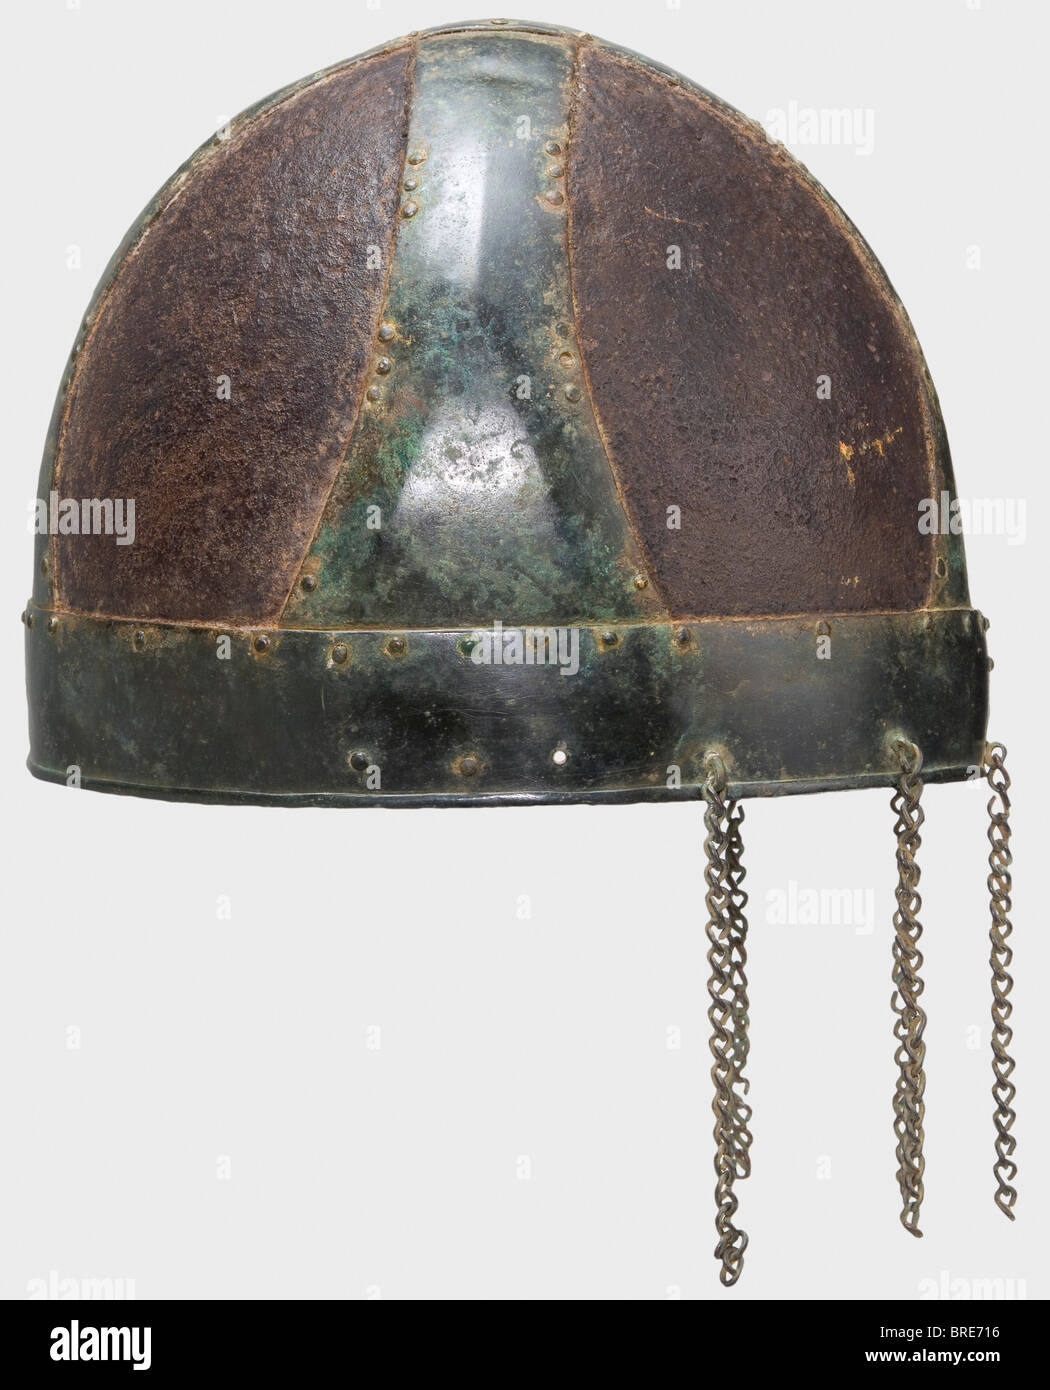 A 'Spangenhelm', Migration Period, 6th century Iron skull made in four pieces with overlapping bronze bands forming a cross. The slightly ridged helmet bands taper from wide bases, and are riveted to the skull pieces along the rims. A surrounding brow band with a turned under rim riveted to the lower edge. Five loops at the nape of the neck with hanging bronze chains about 10 cm long. The iron plates rusted through in places. Cleaned excavation find. Height 17.5 cm. historic, historical, ancient world, defensive arms, weapons, arms, weapon, arm, fighting device, Stock Photo